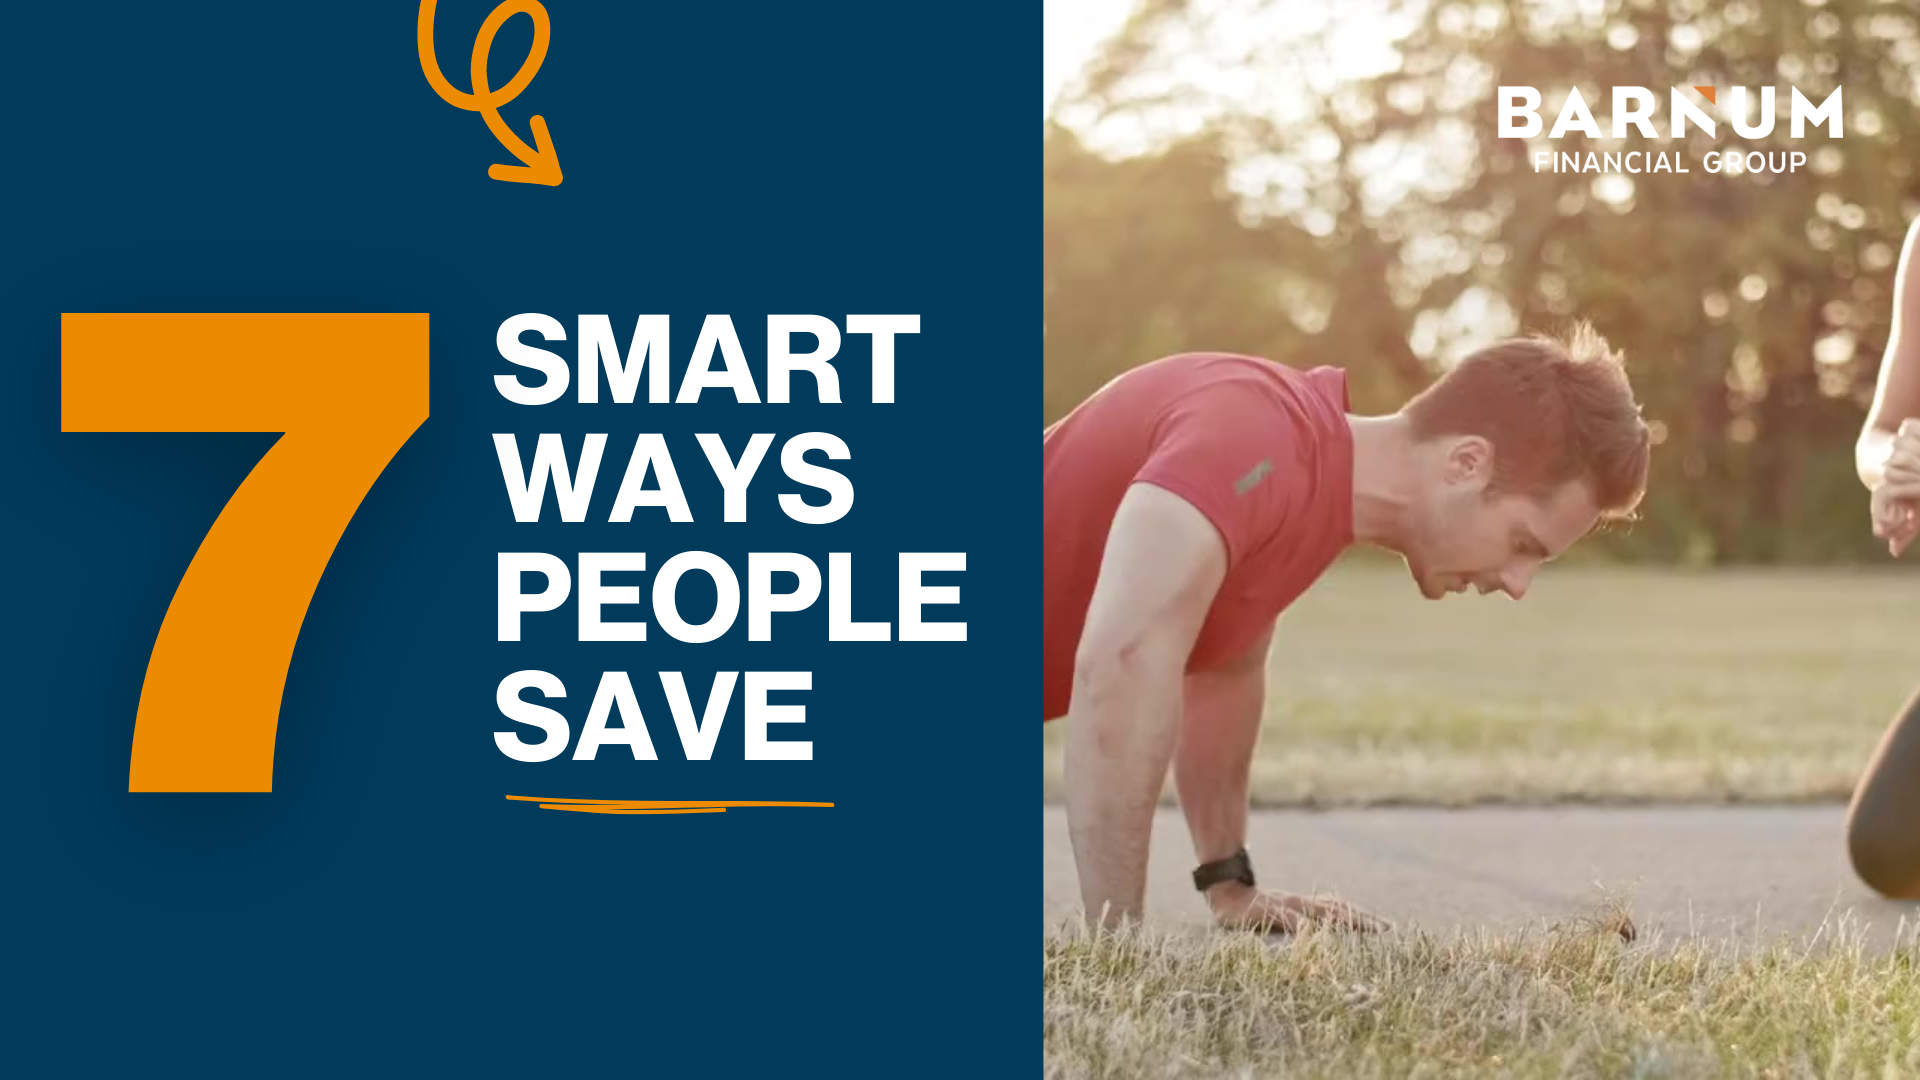 Smart Ways to Save: Education and Motivation